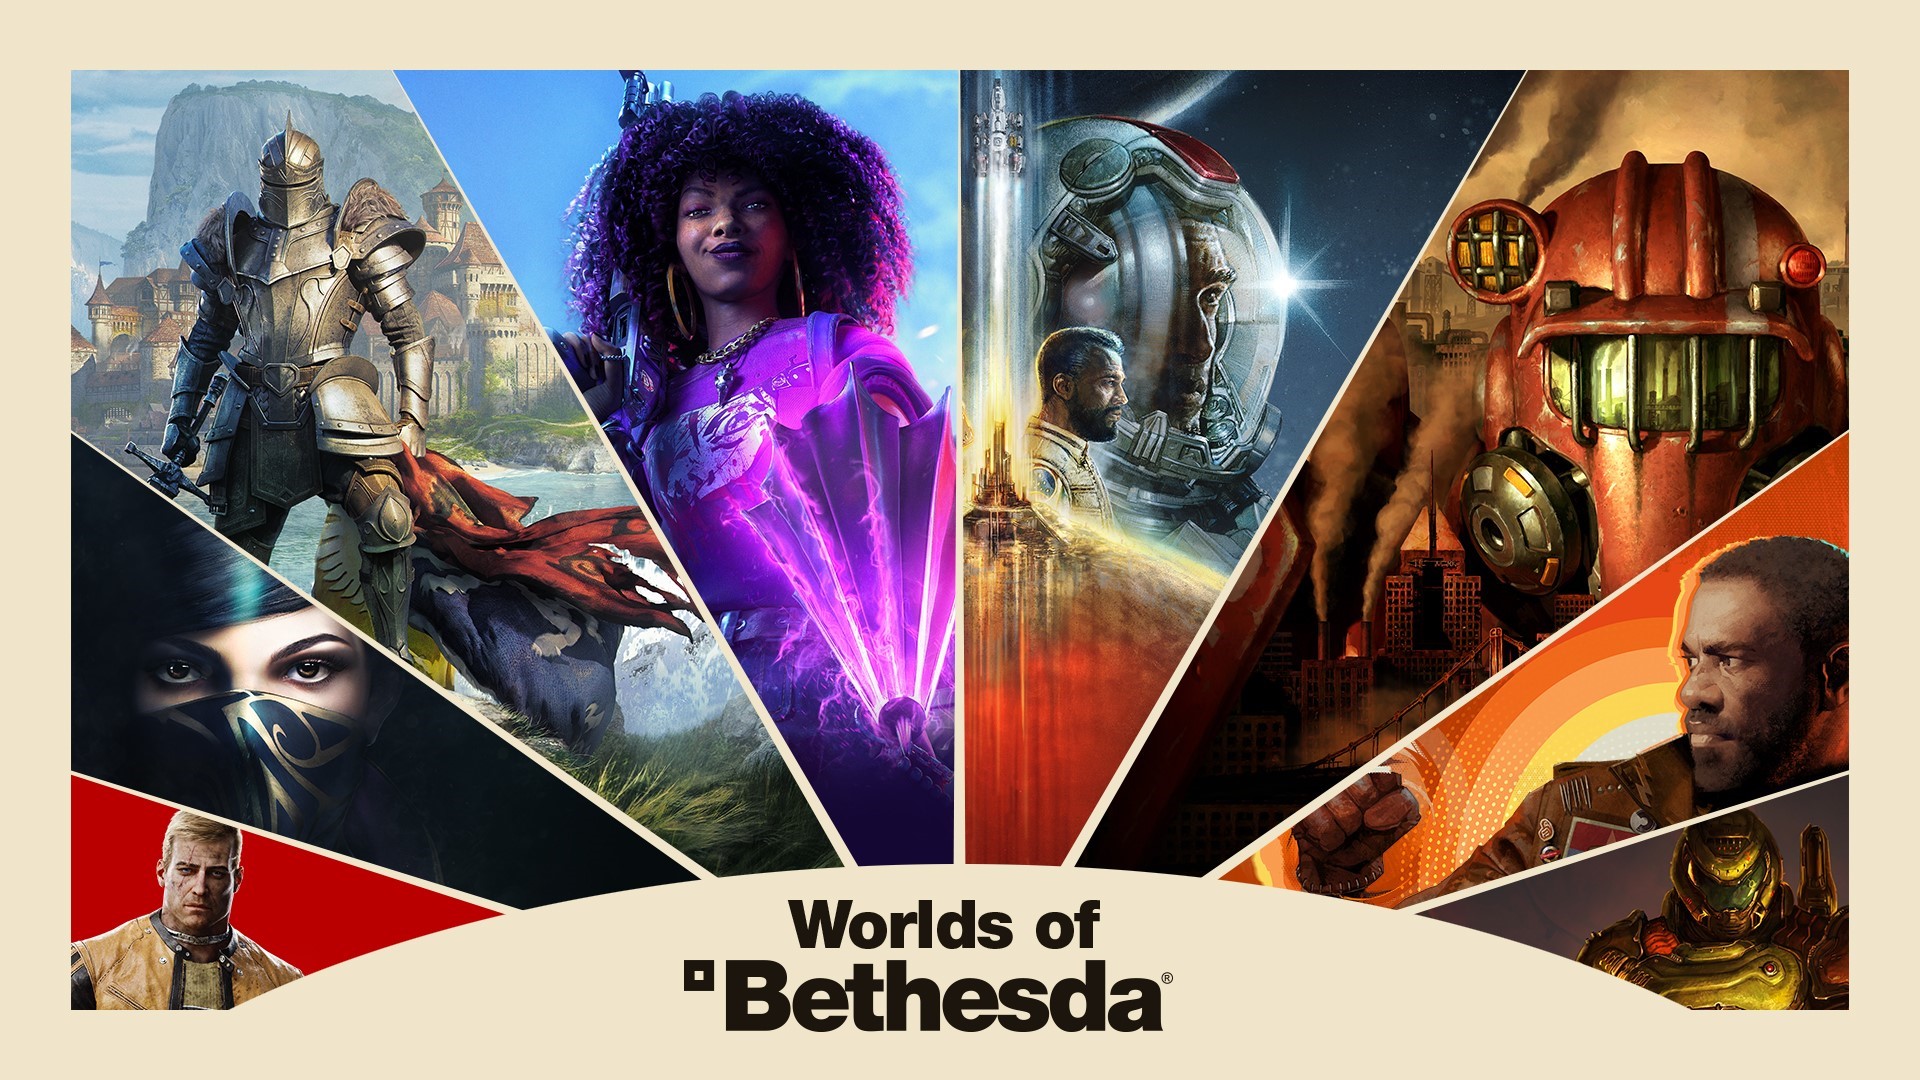 Bethesda accessibility updates: Redfall, Fallout 76, and Starfield